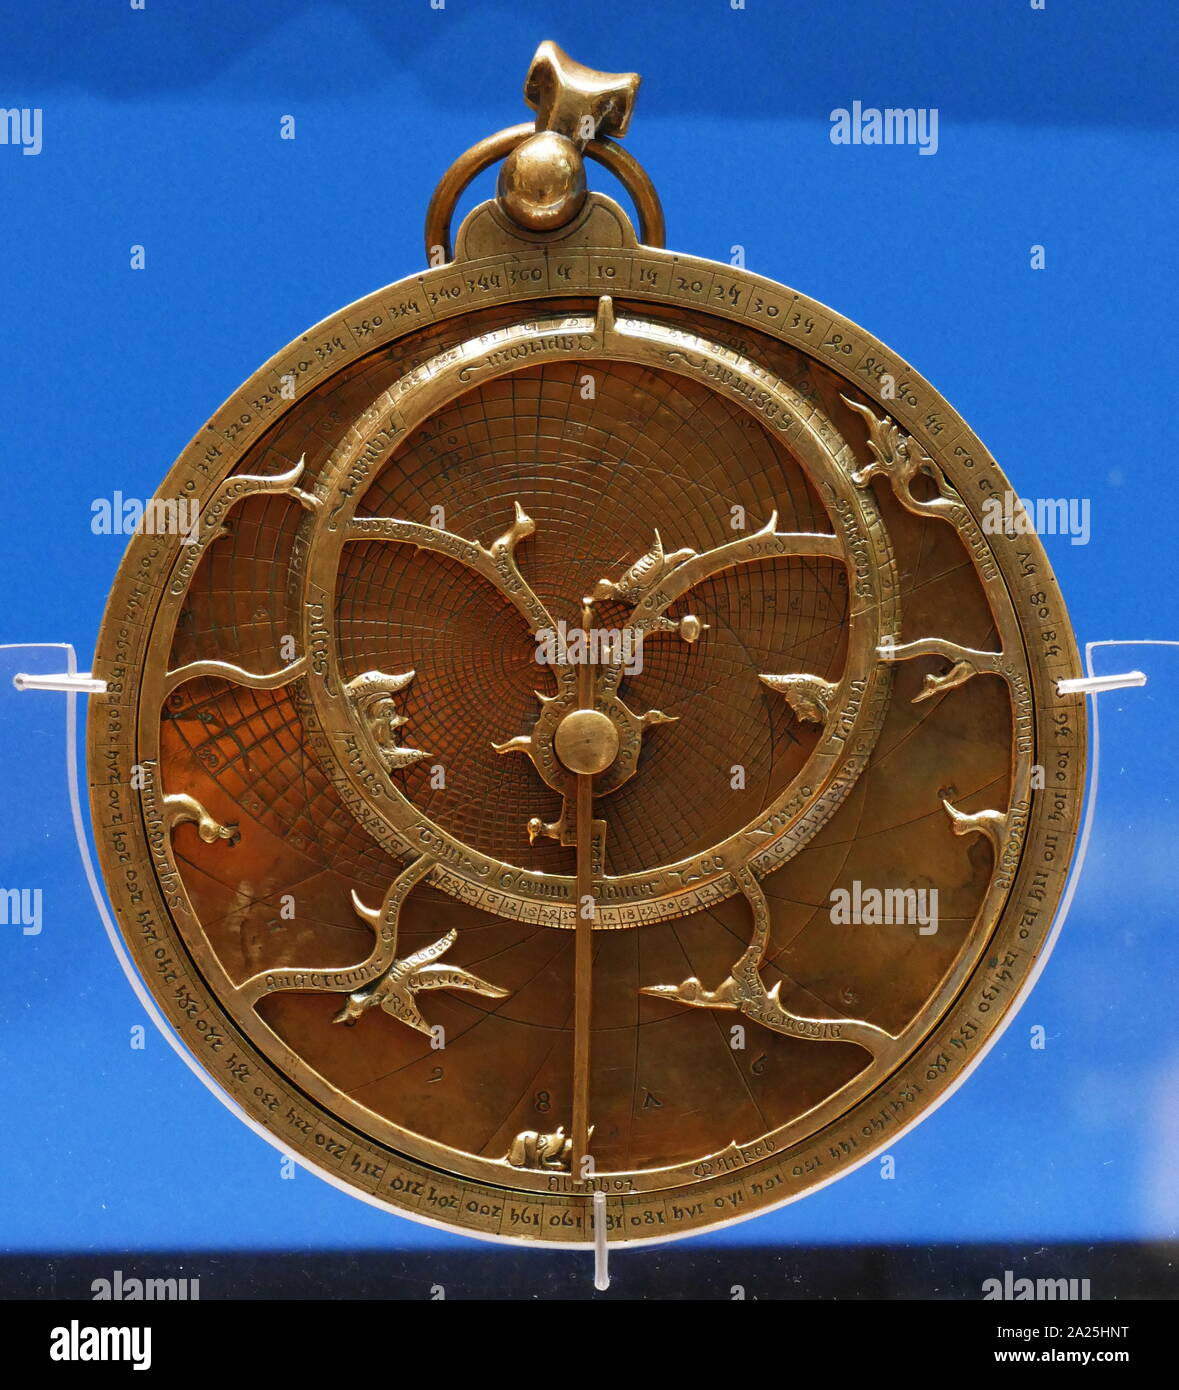 The 'Chaucer' astrolabe. This type of astrolabe has been linked to the poet, Geoffrey Chaucer (c. 1340-1400), who held important royal offices under Richard II. An astrolabe is basically a two-dimensional map of the celestial sphere. This particular astrolabe, dated 1326, resembles the instrument described in Geoffrey Chaucer's Treatise on the Astrolabe. Stock Photo